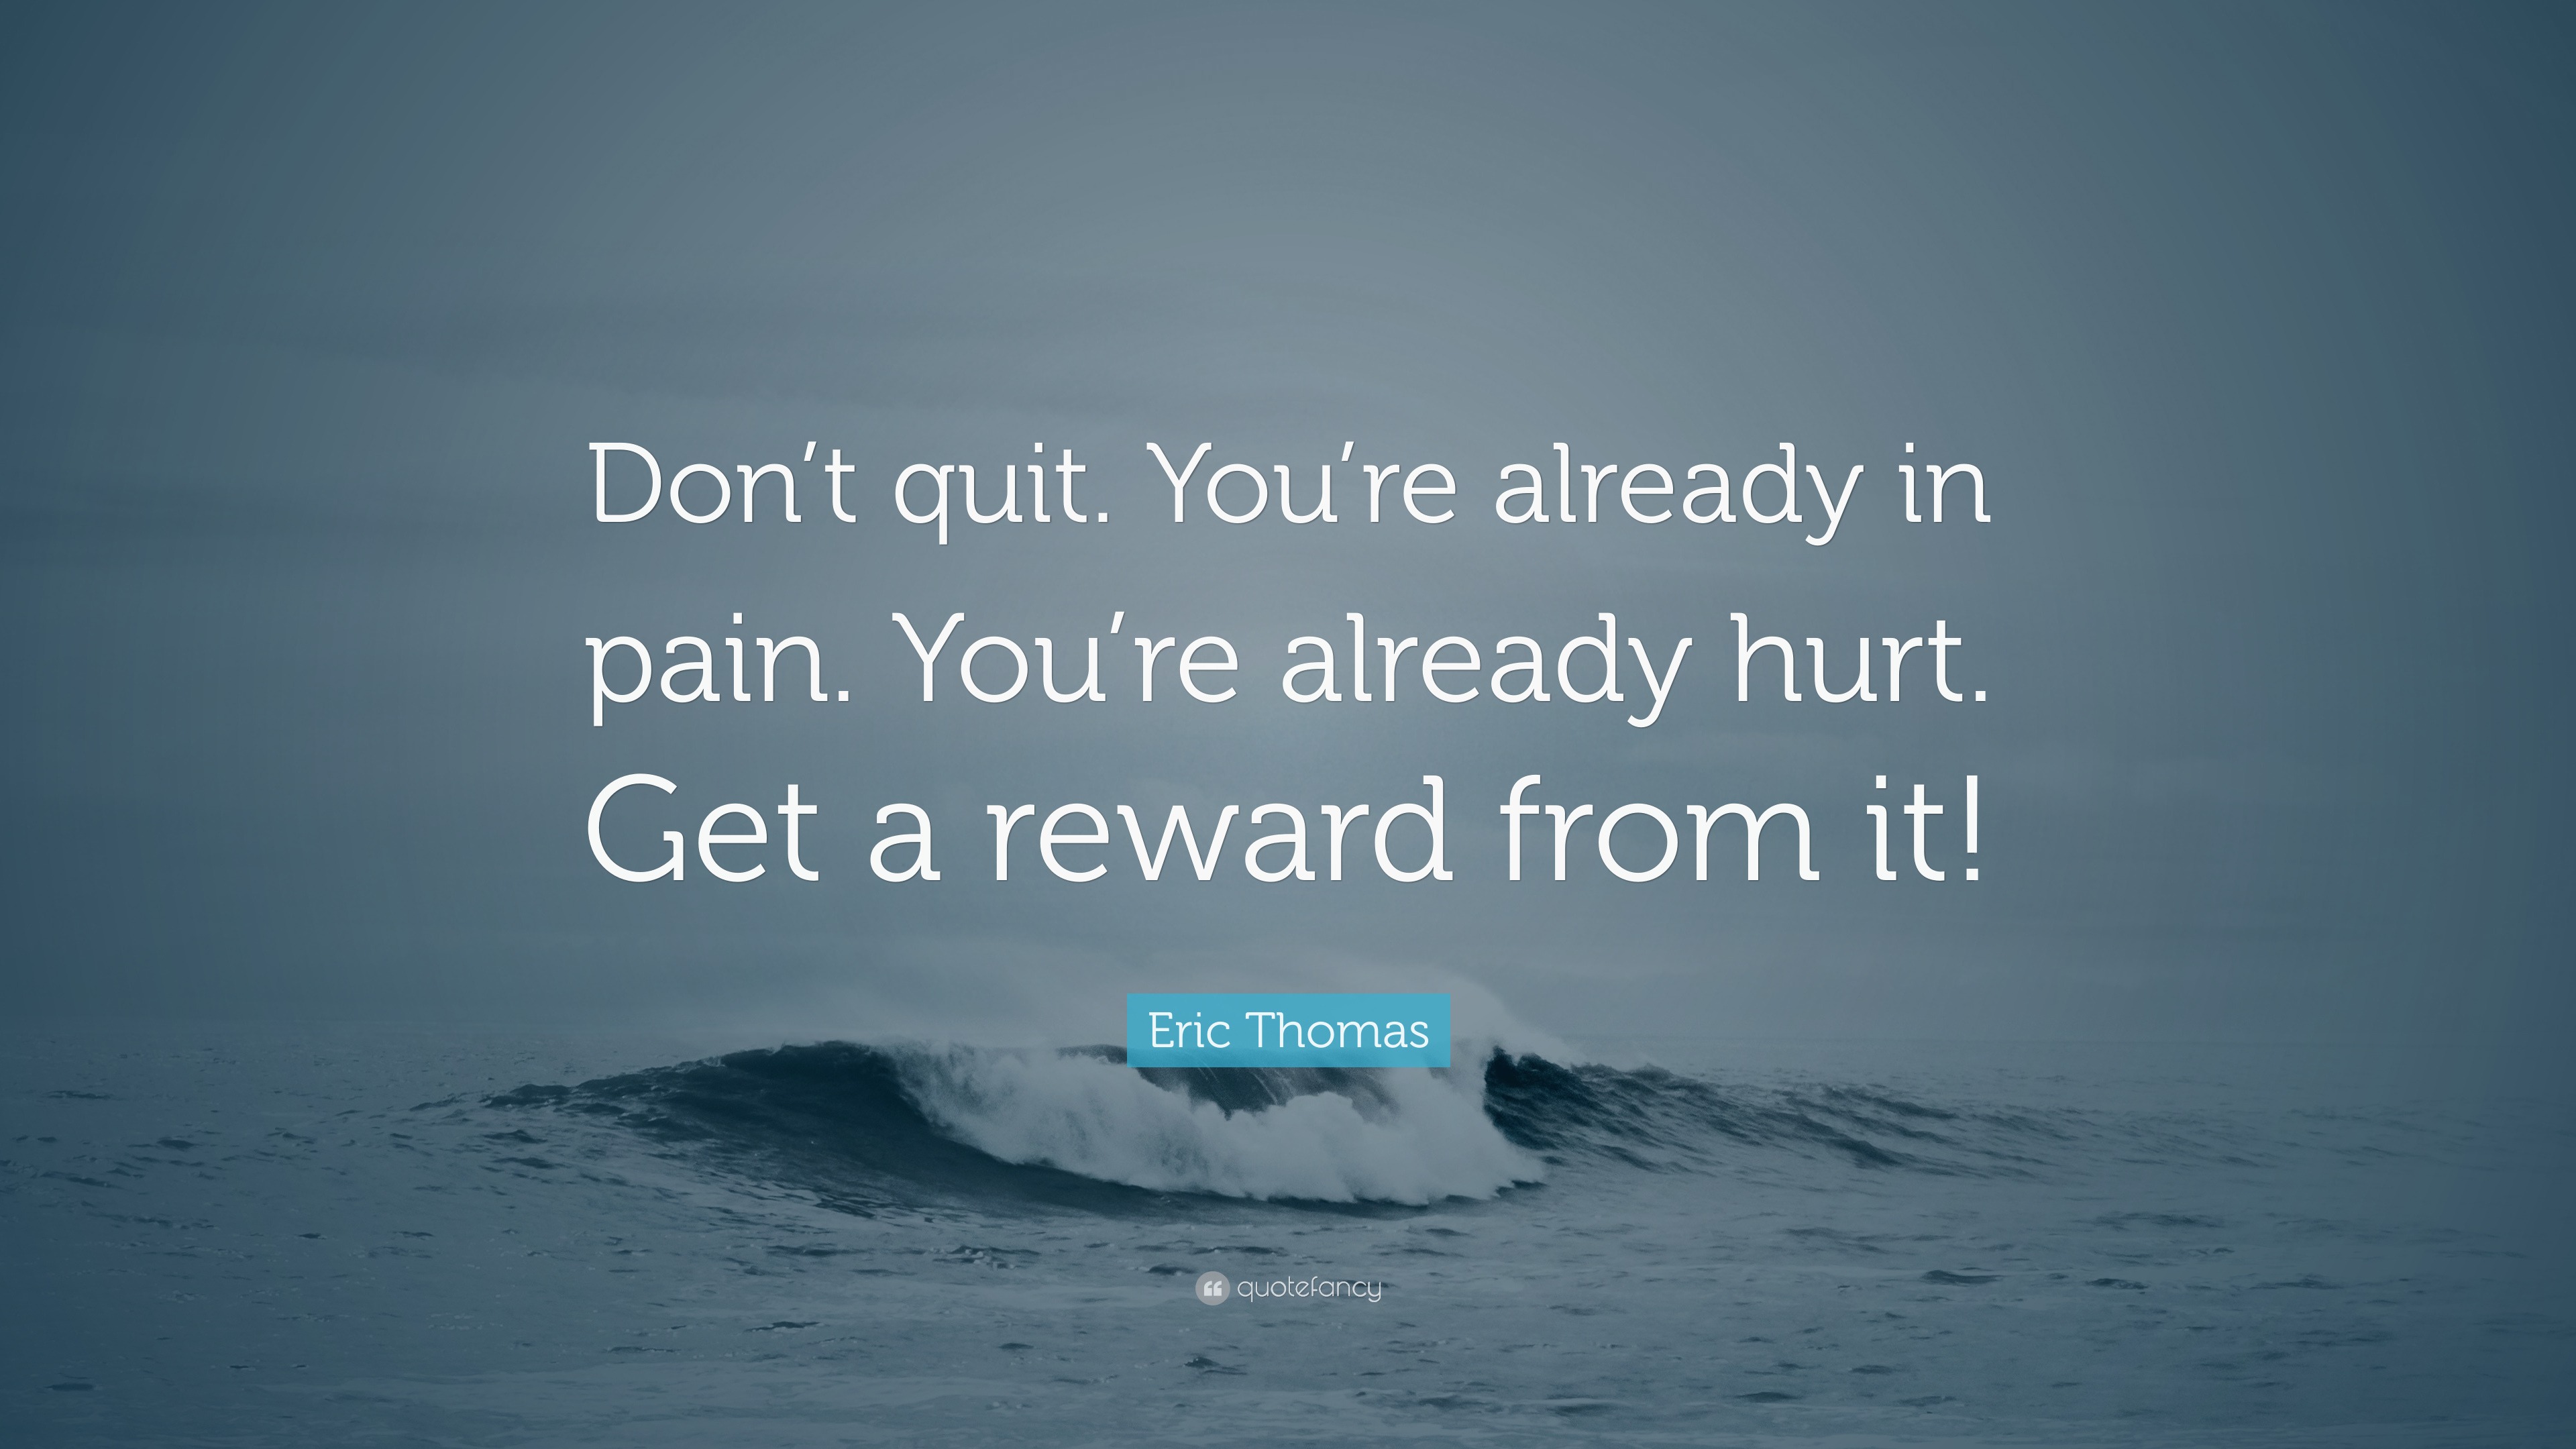 Eric Thomas Quote: "Don’t quit. You’re already in pain. You’